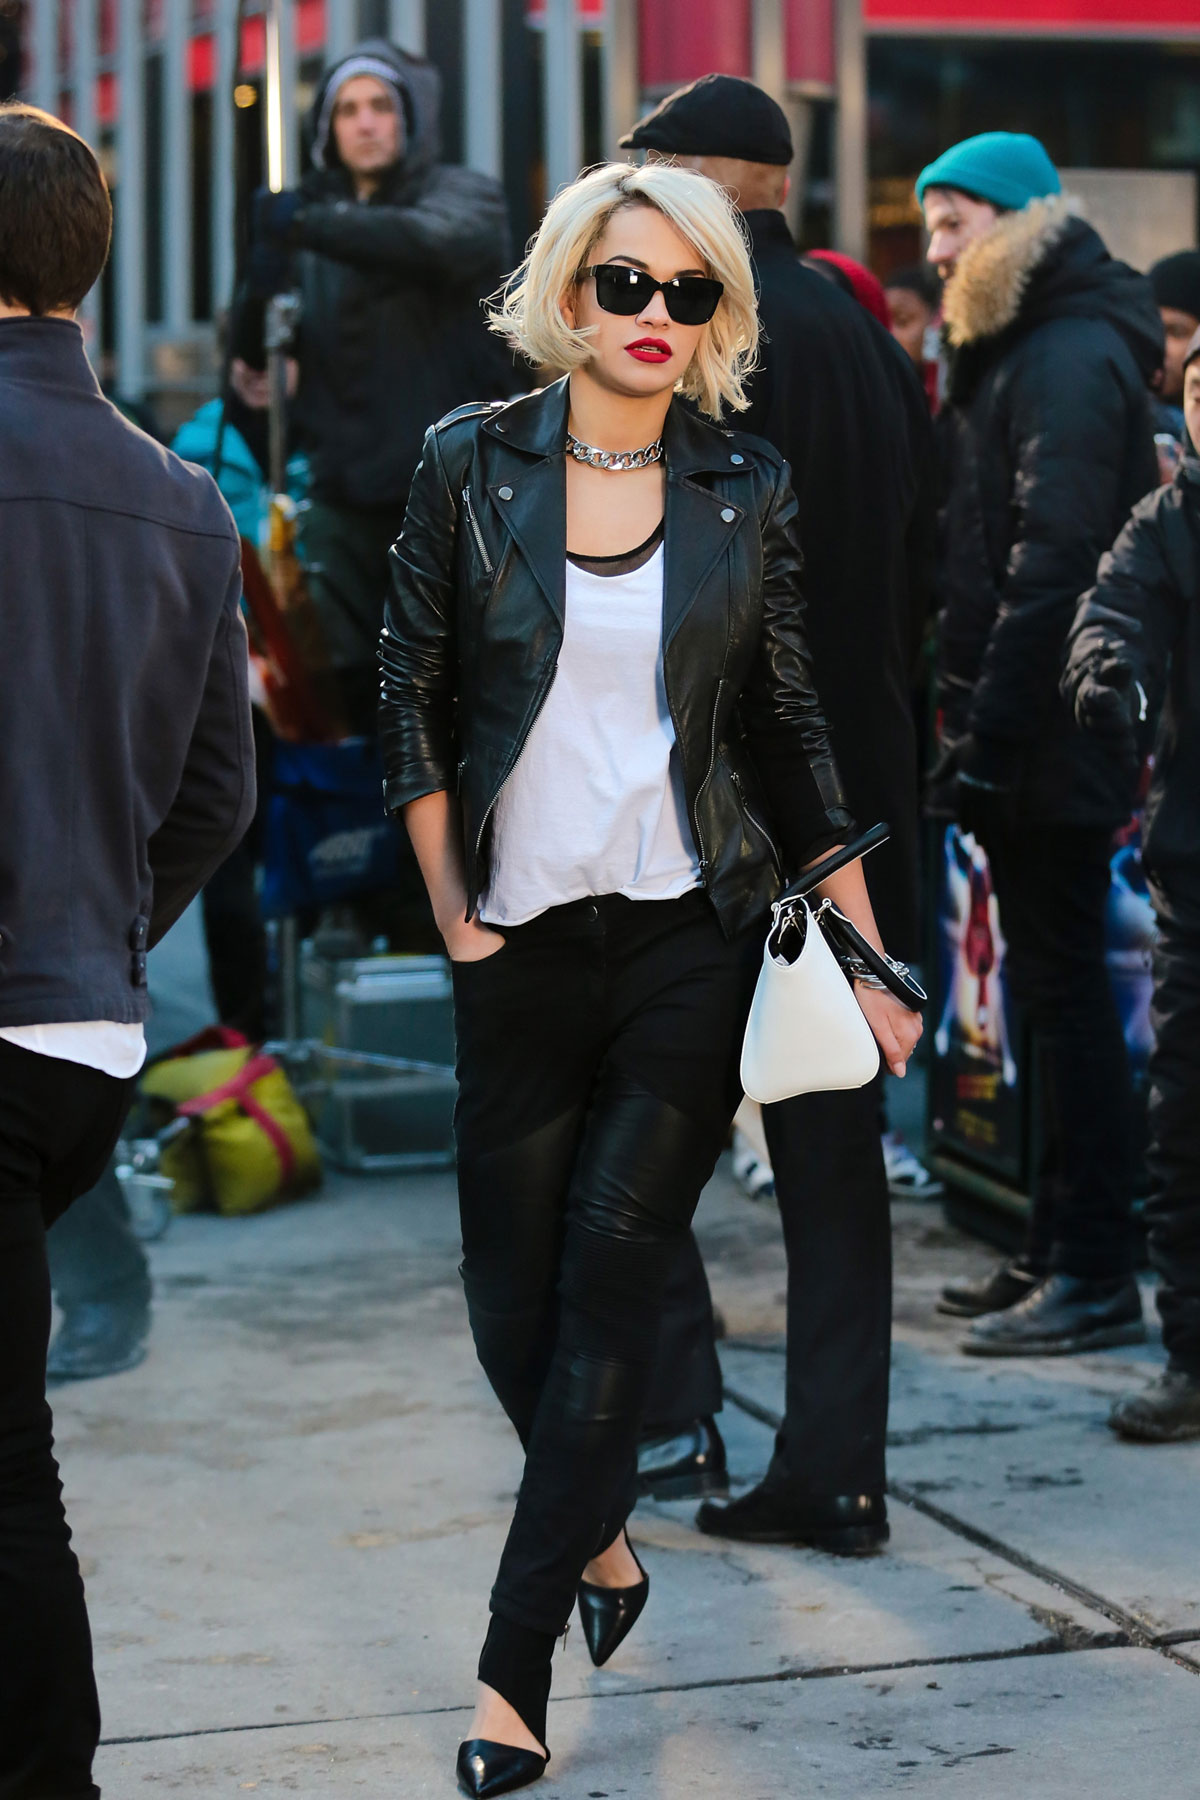 Rita Ora does a photo shoot in Times Square